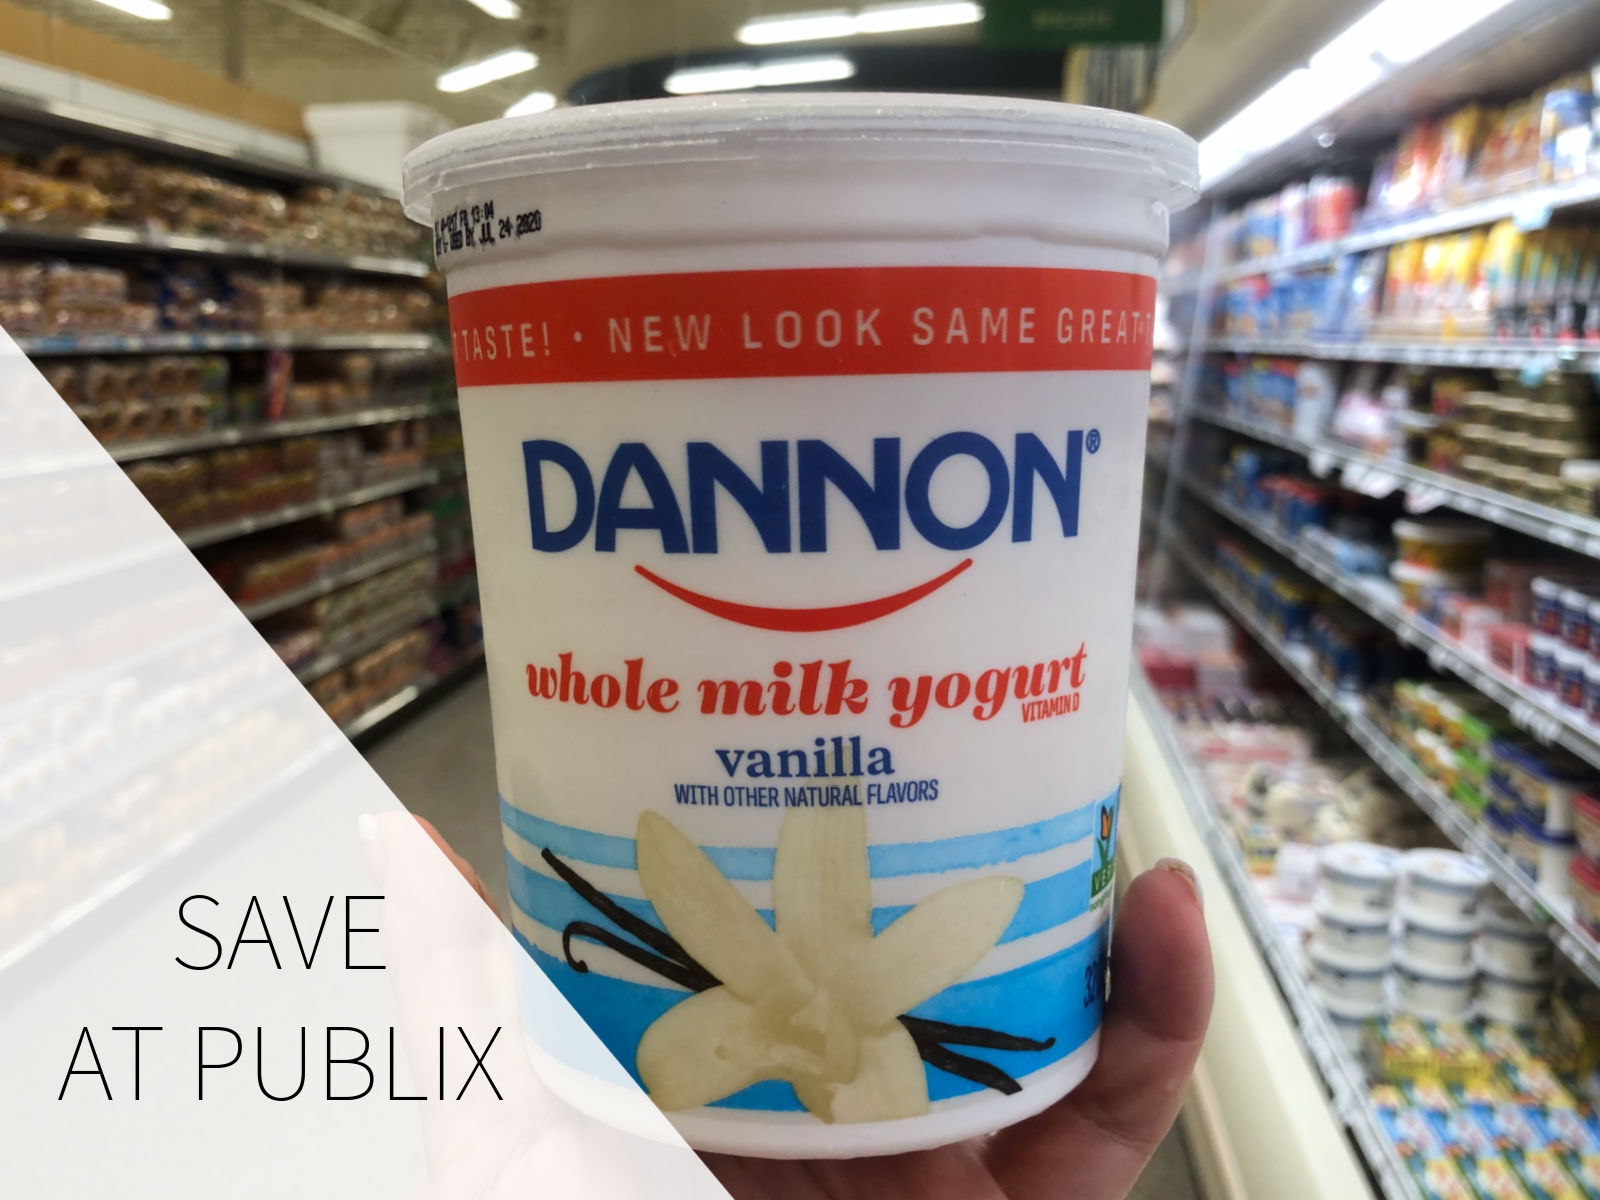 Save Big On Dannon Yogurt At Publix - New Look With The Same Great Taste! on I Heart Publix 3